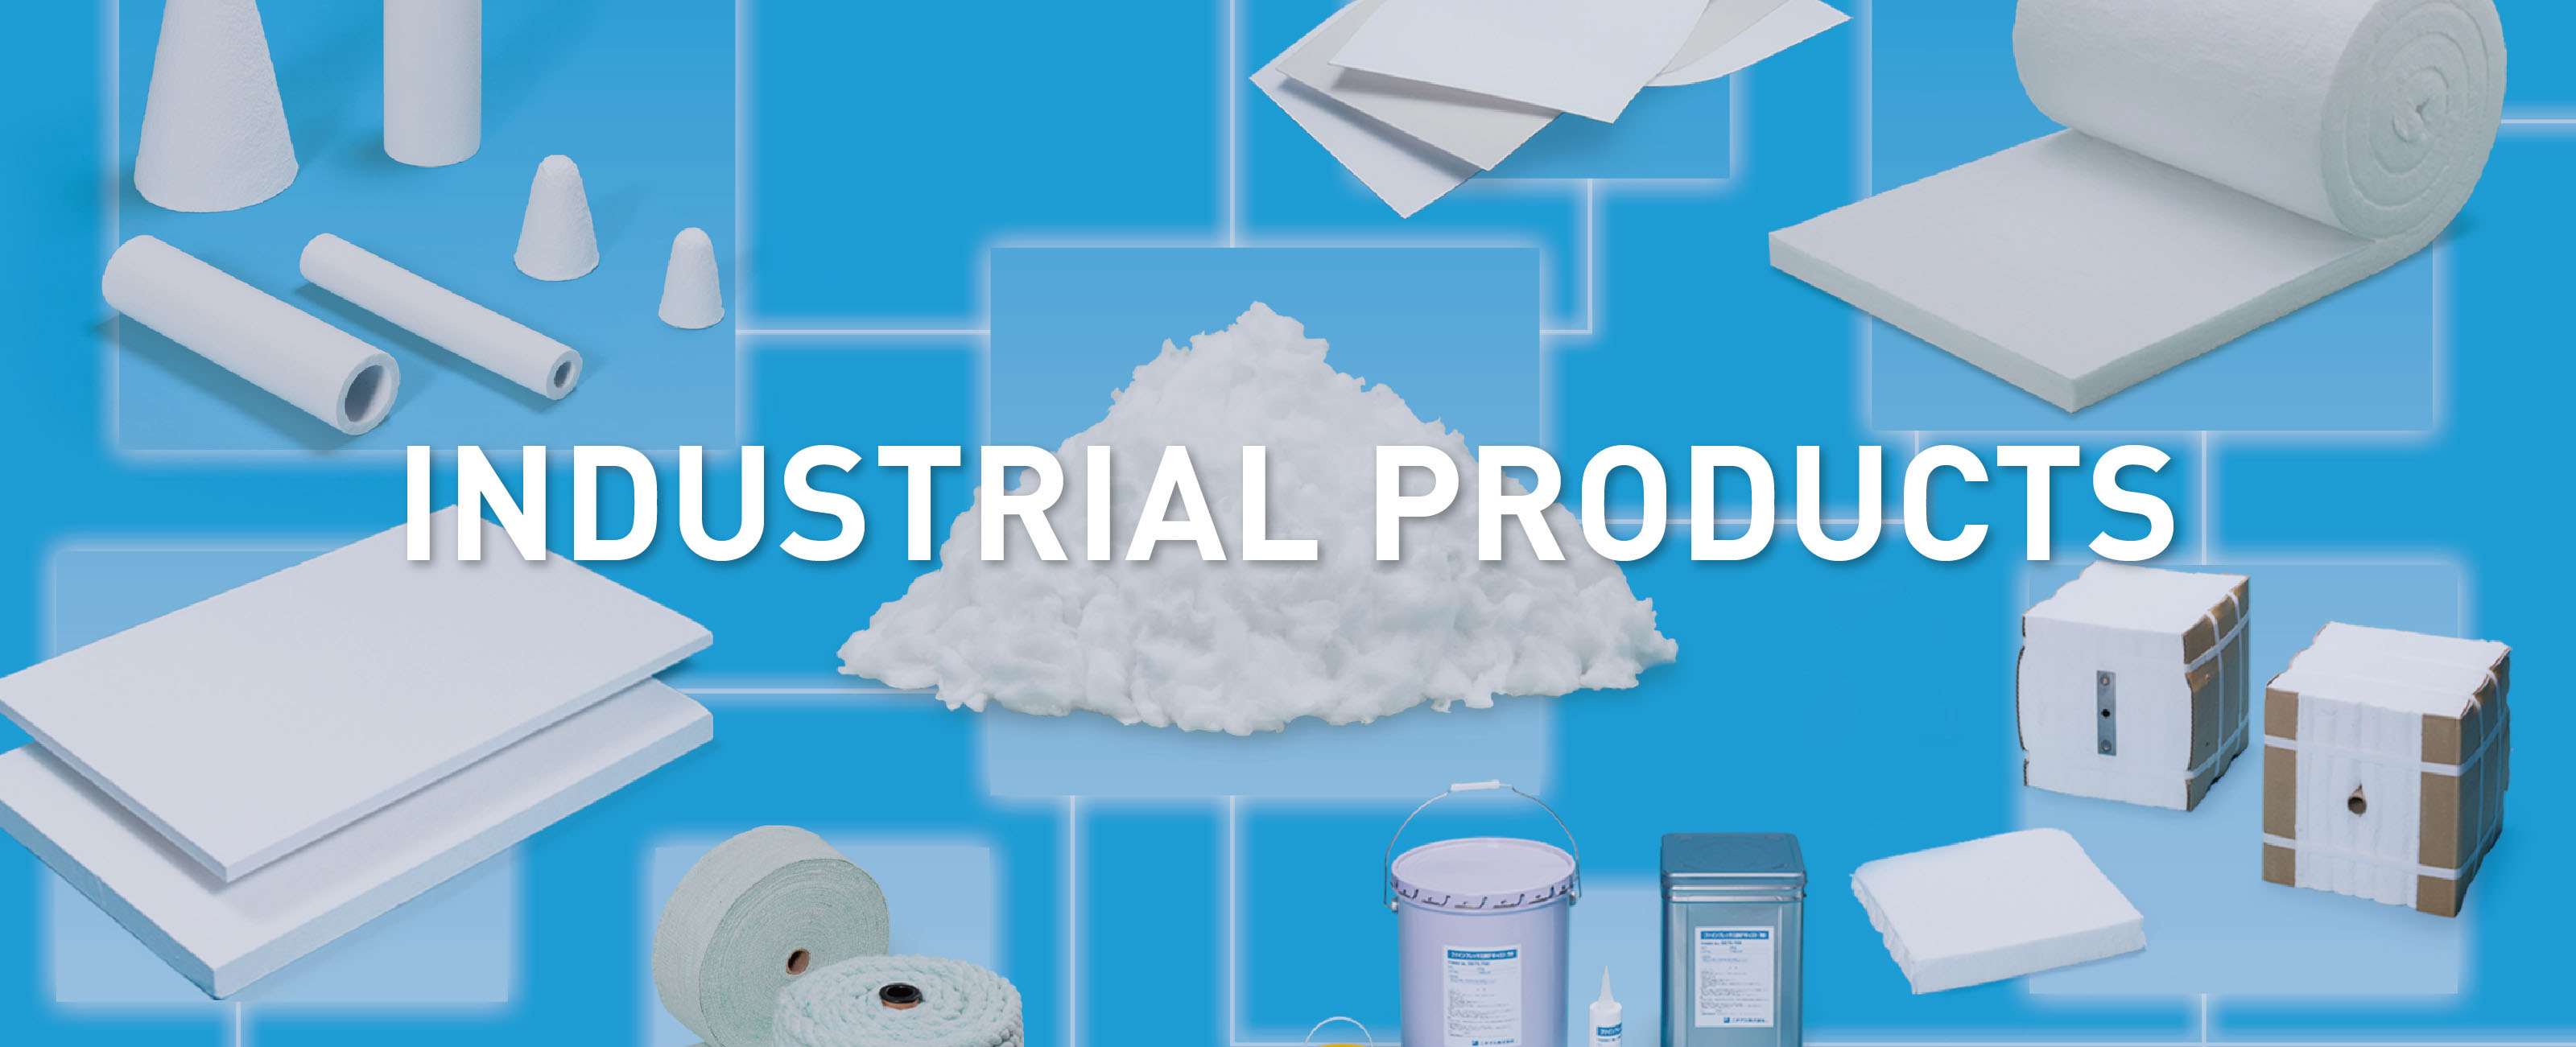 Industrial Product 